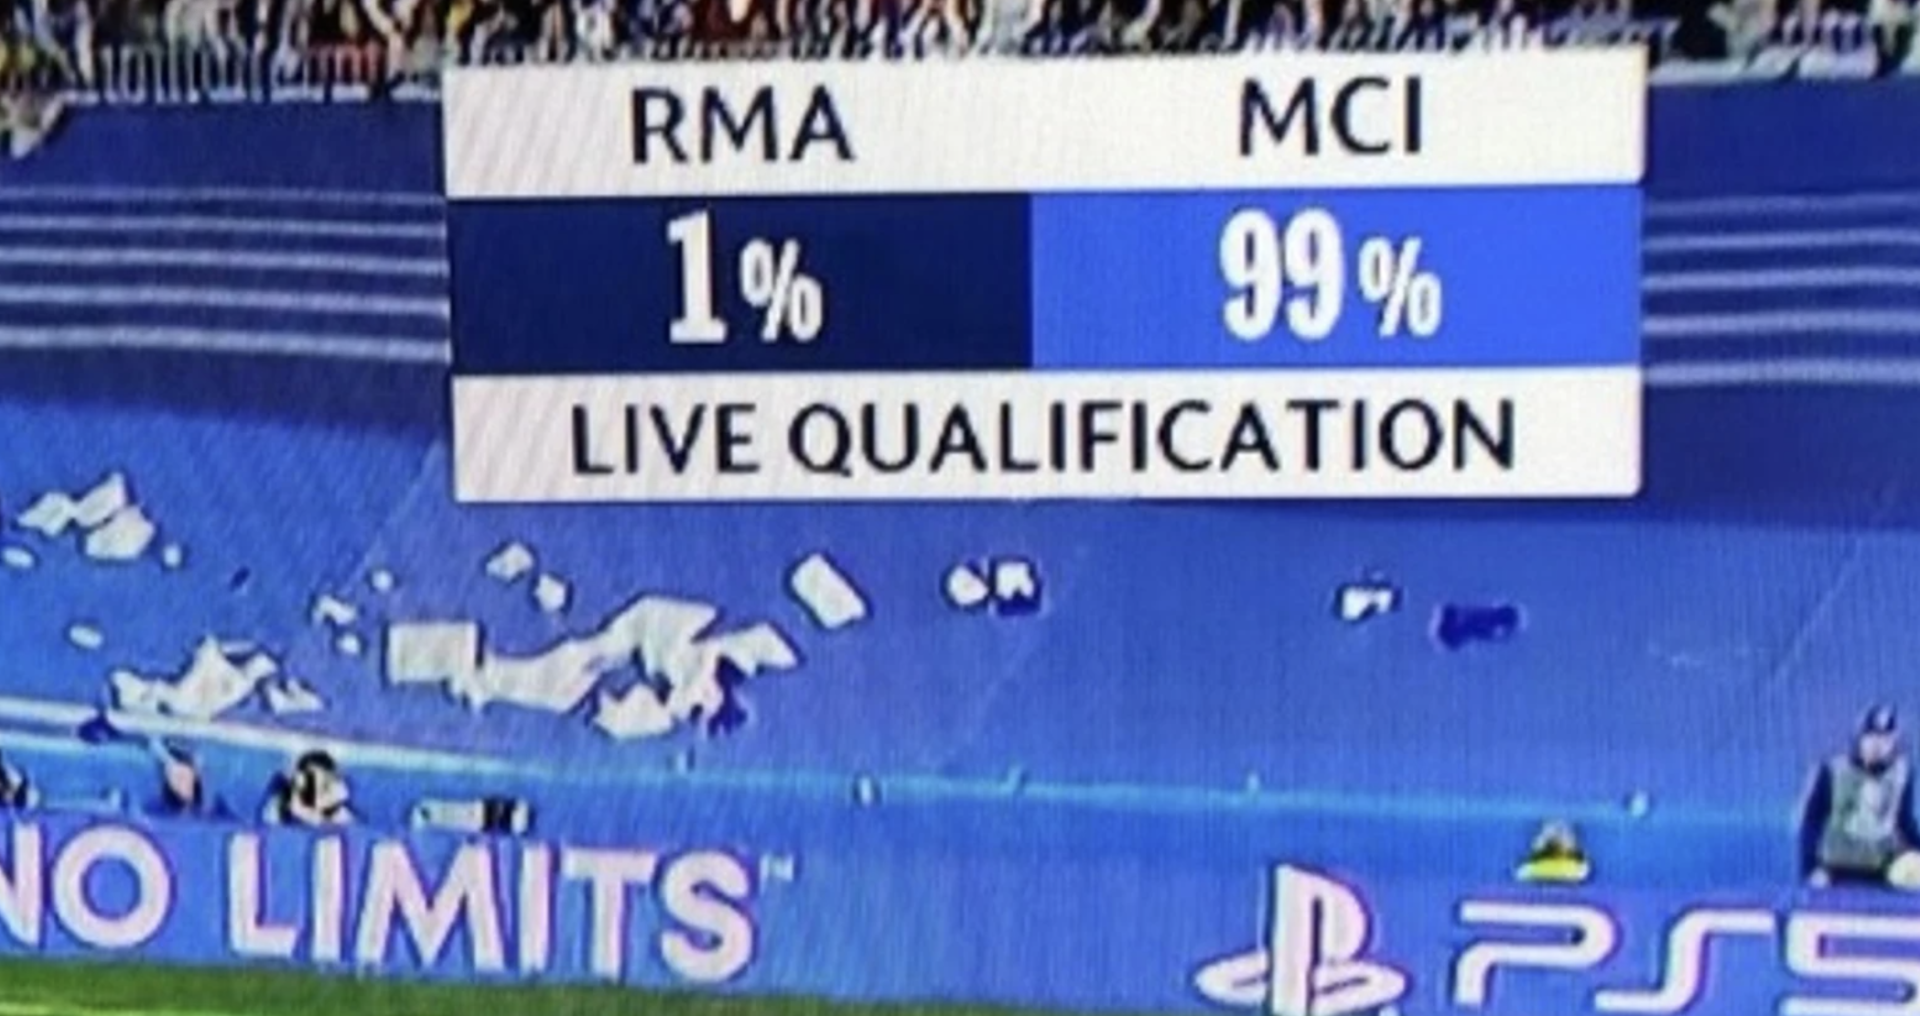 1% chance of qualification, Real Madrid vs Manchester City, 2022